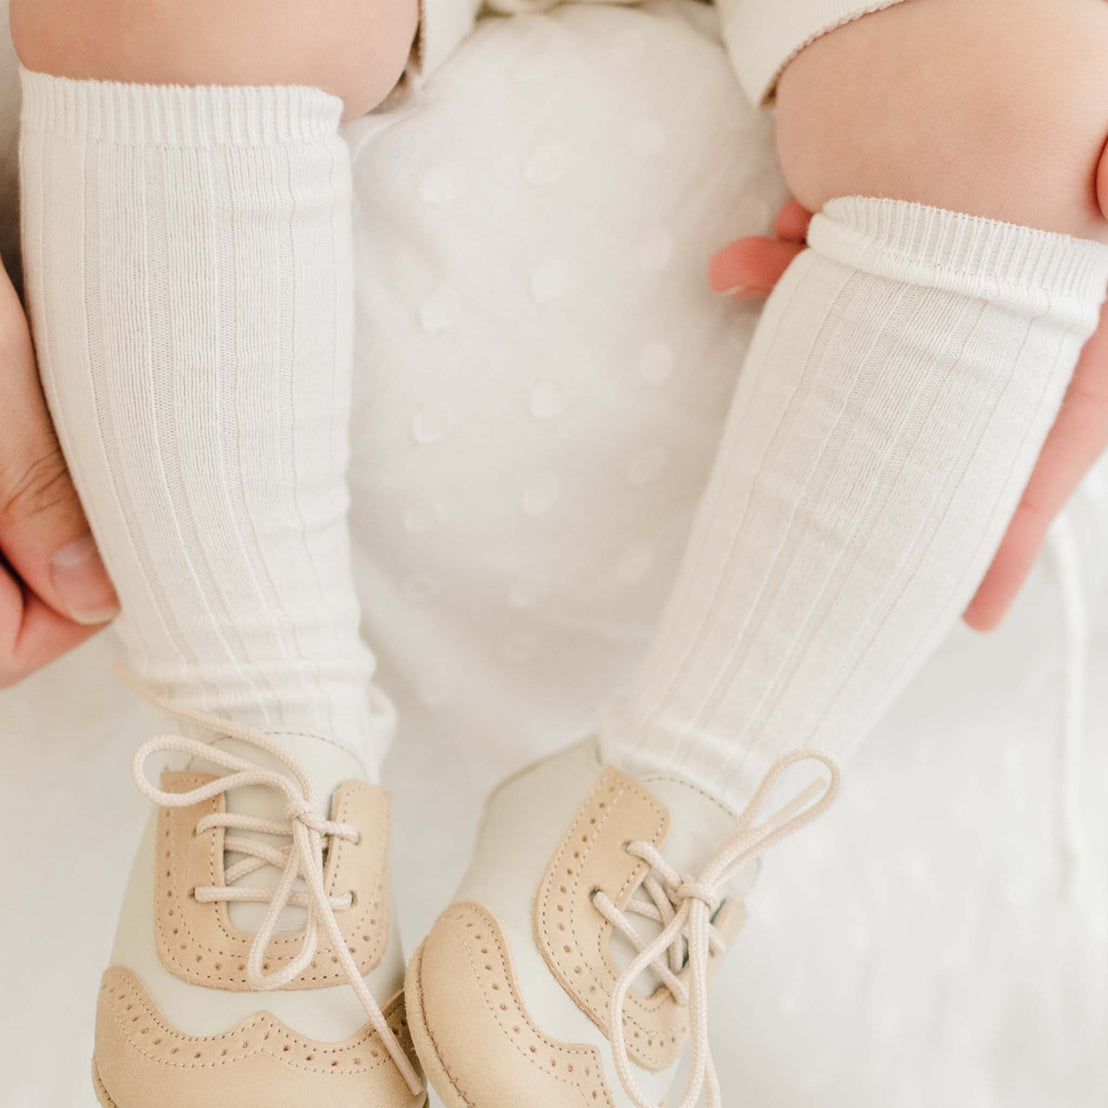 Close-up image of a baby's feet in Cream Ribbed Knee Socks, set against a vintage, white dotted fabric background. Suitable for baptism or christening events.